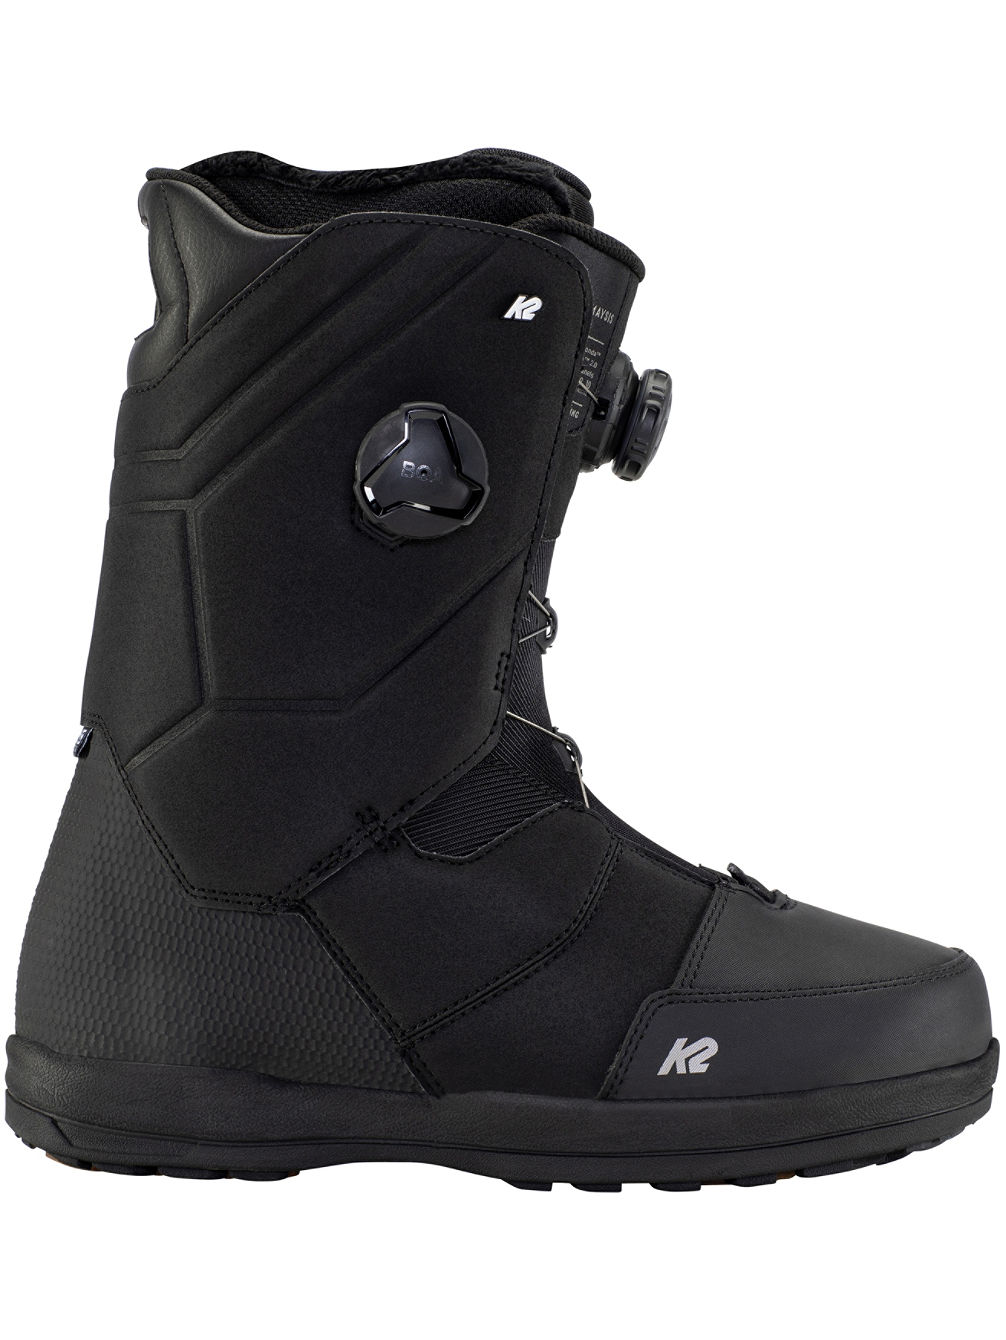 Maysis Wide 2022 Snowboard Boots